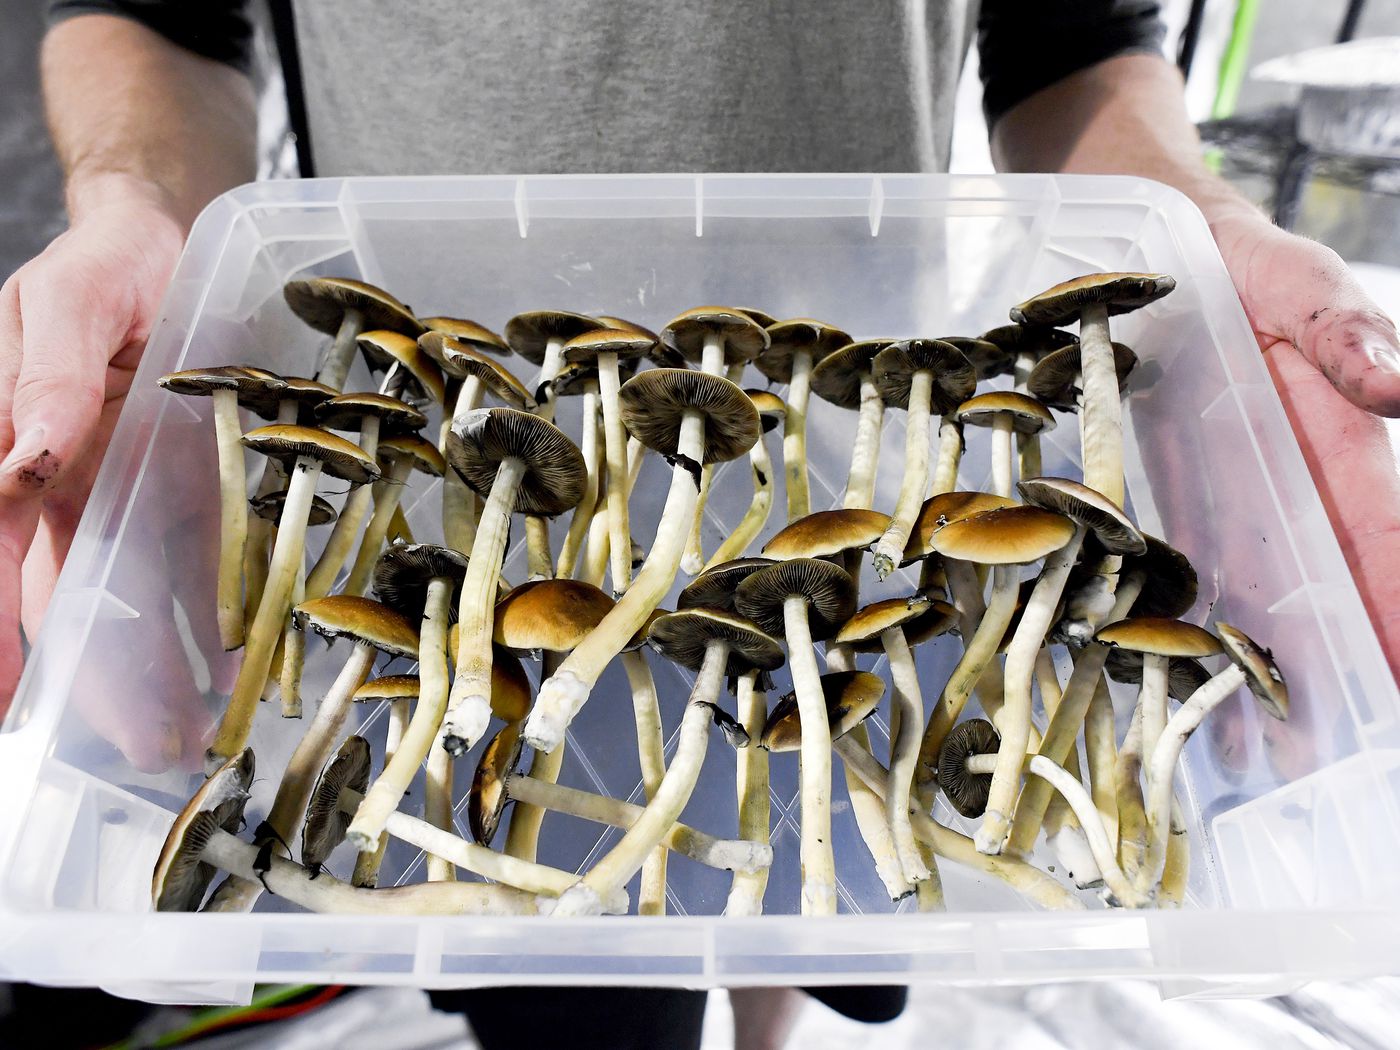 What should you know before taking mushrooms?